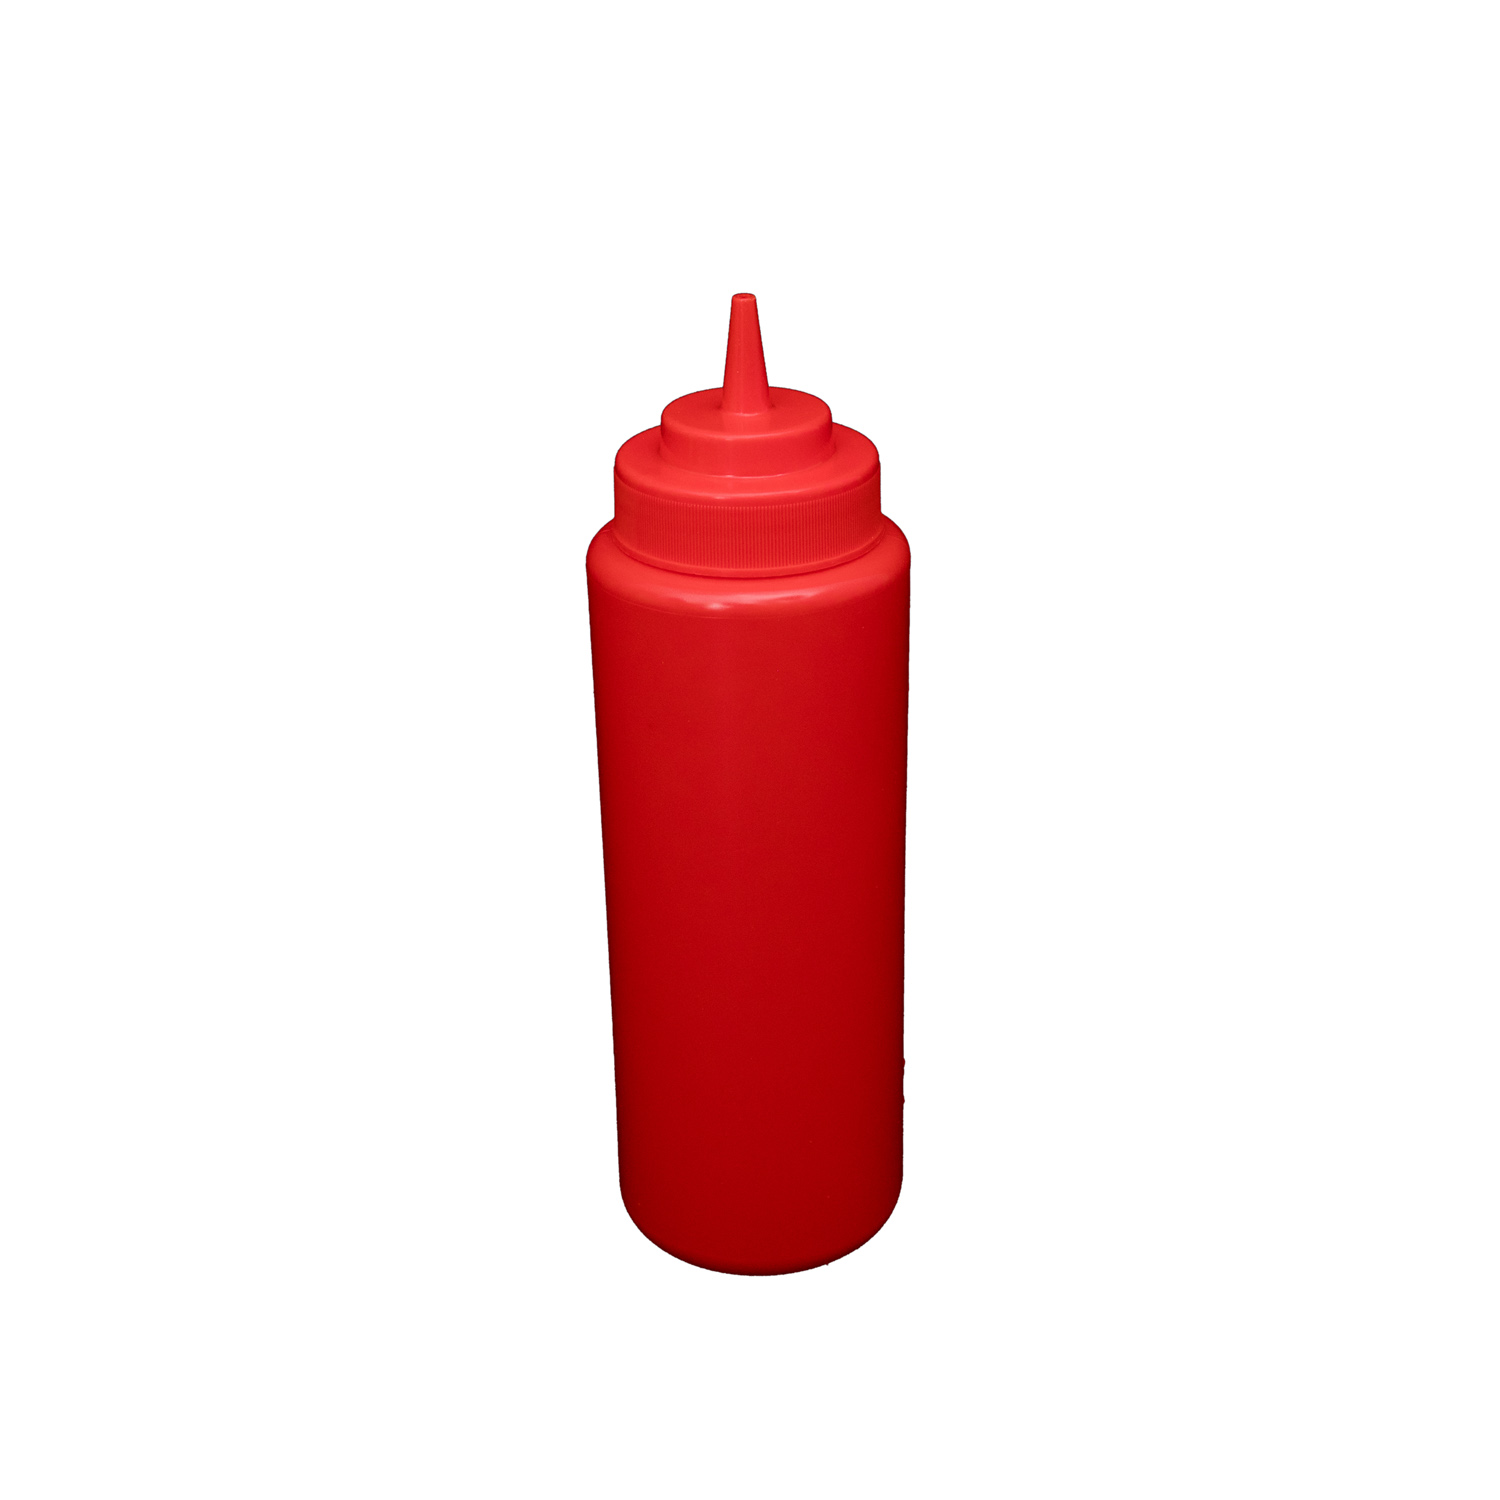 CAC China SQBT-W-32R Red Wide-Mouth Plastic Squeeze Bottle 32 oz.